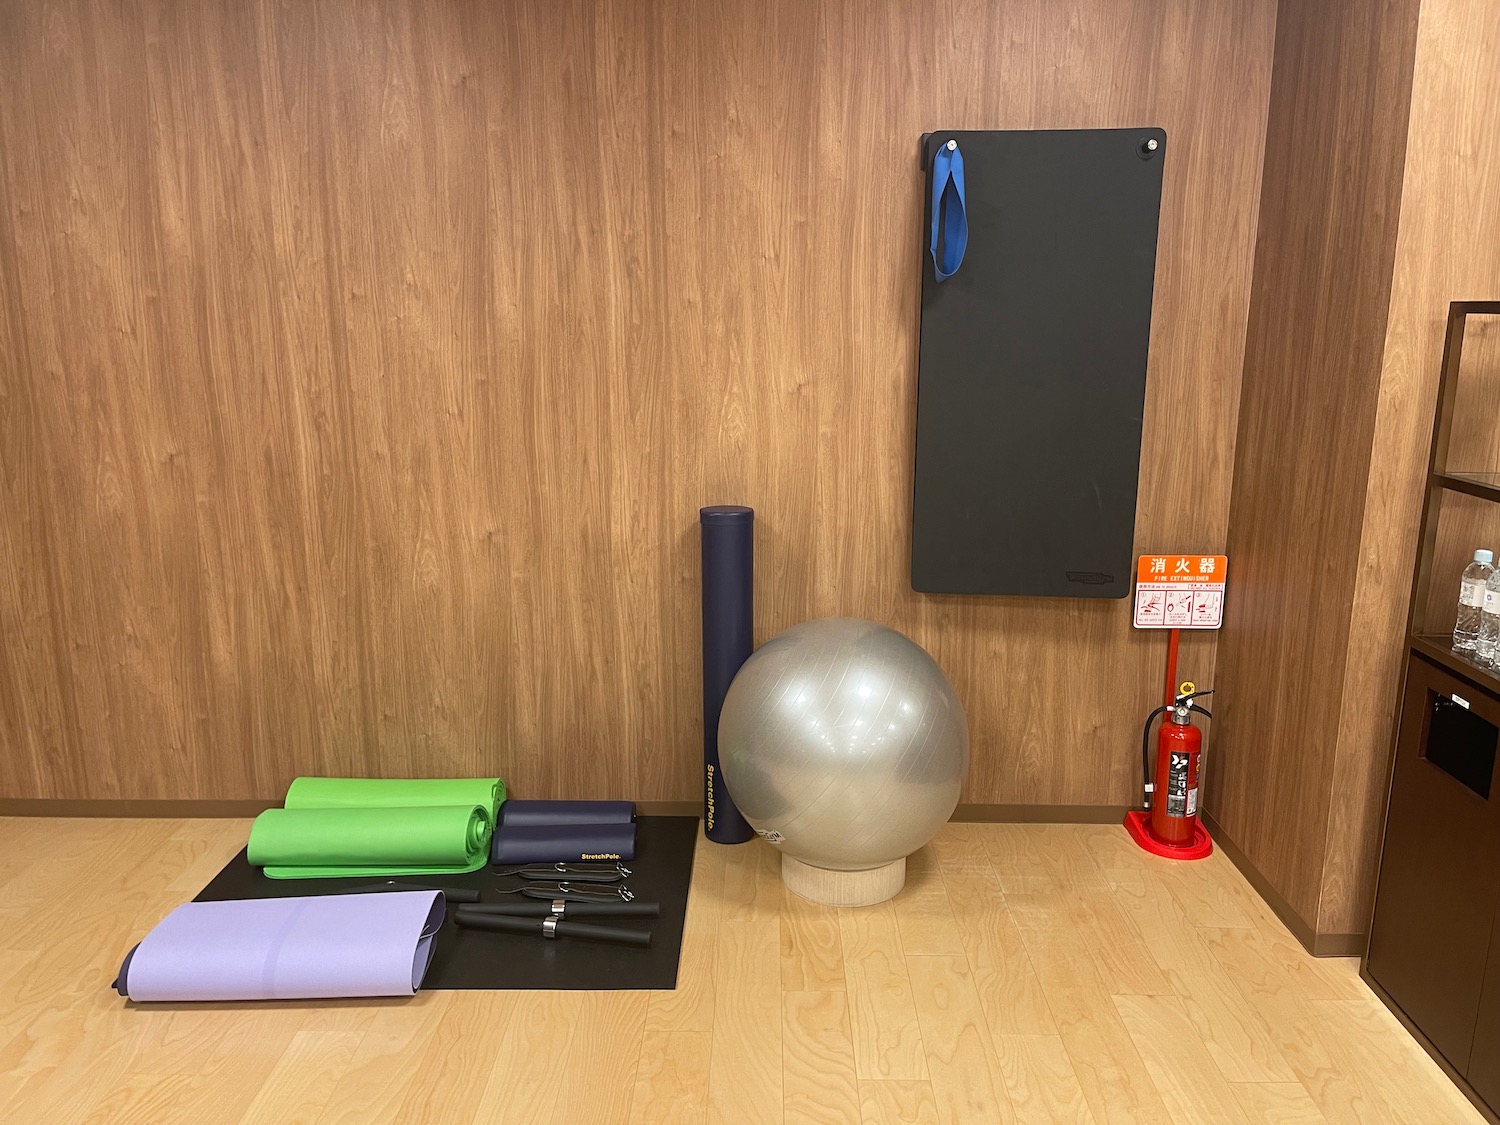 a yoga mat and exercise equipment on a wood floor